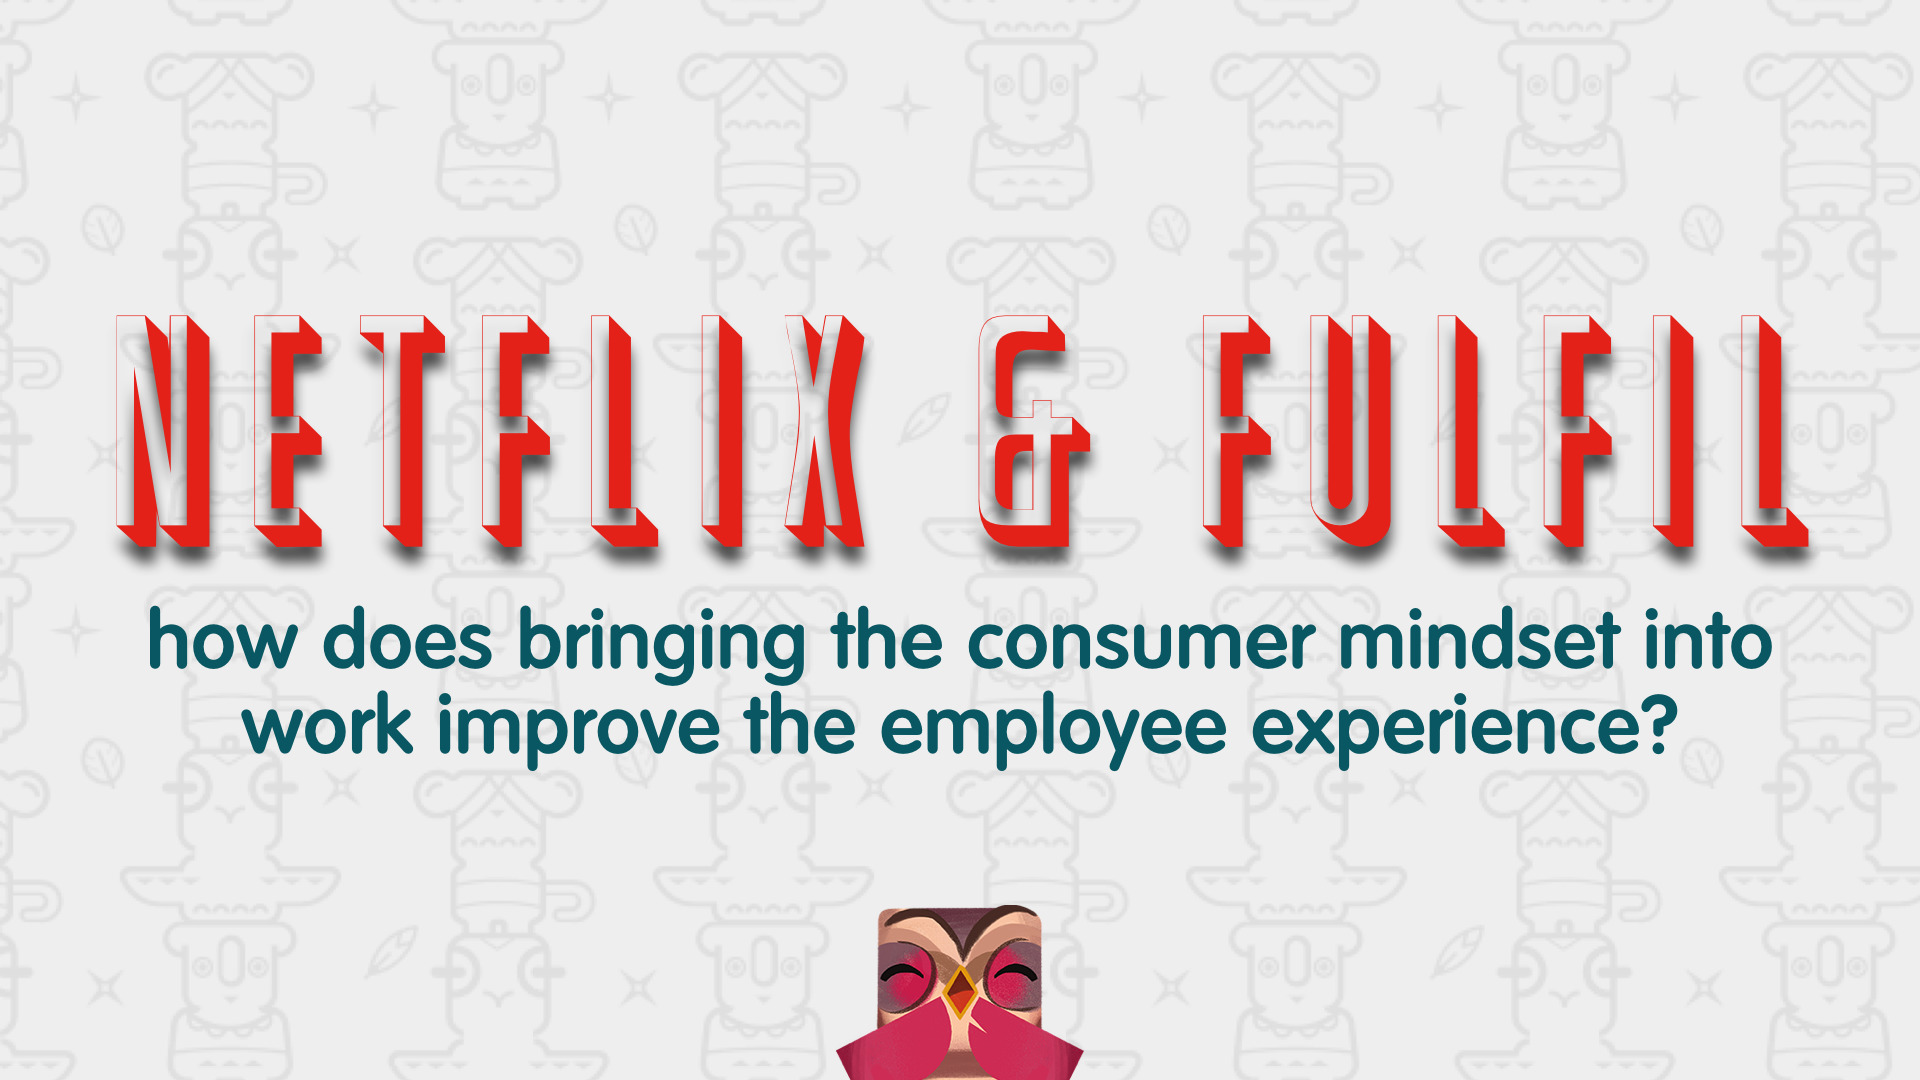 Netflix and Fulfill &#8211; how does bringing the consumer mindset into work improve the employee experience?